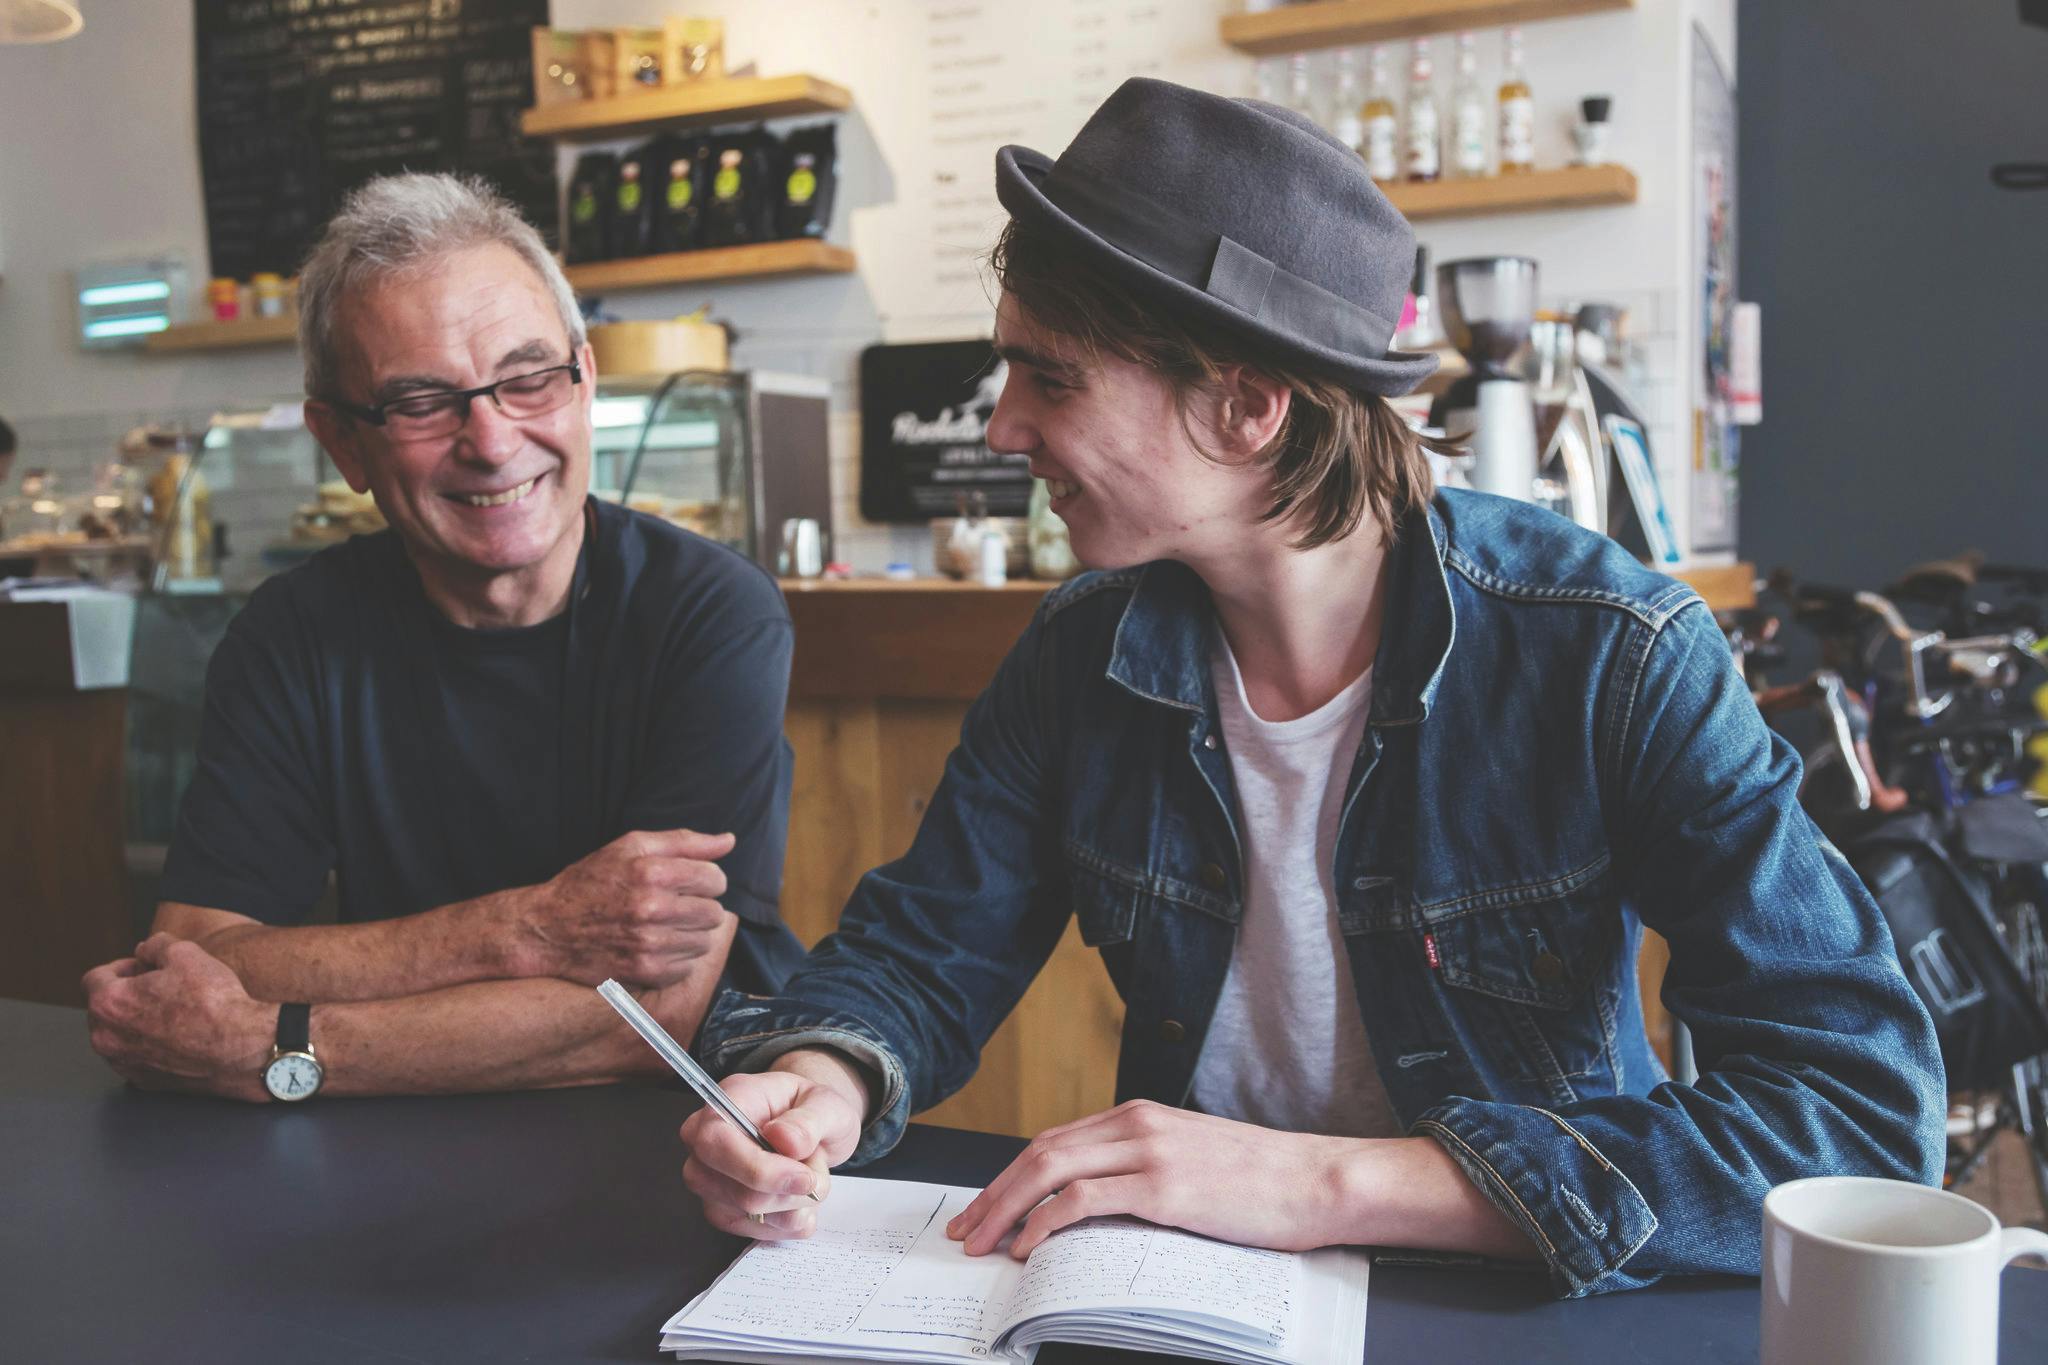 Two people, one young and the other older, sit in a cafe smiling and writing in a notebook